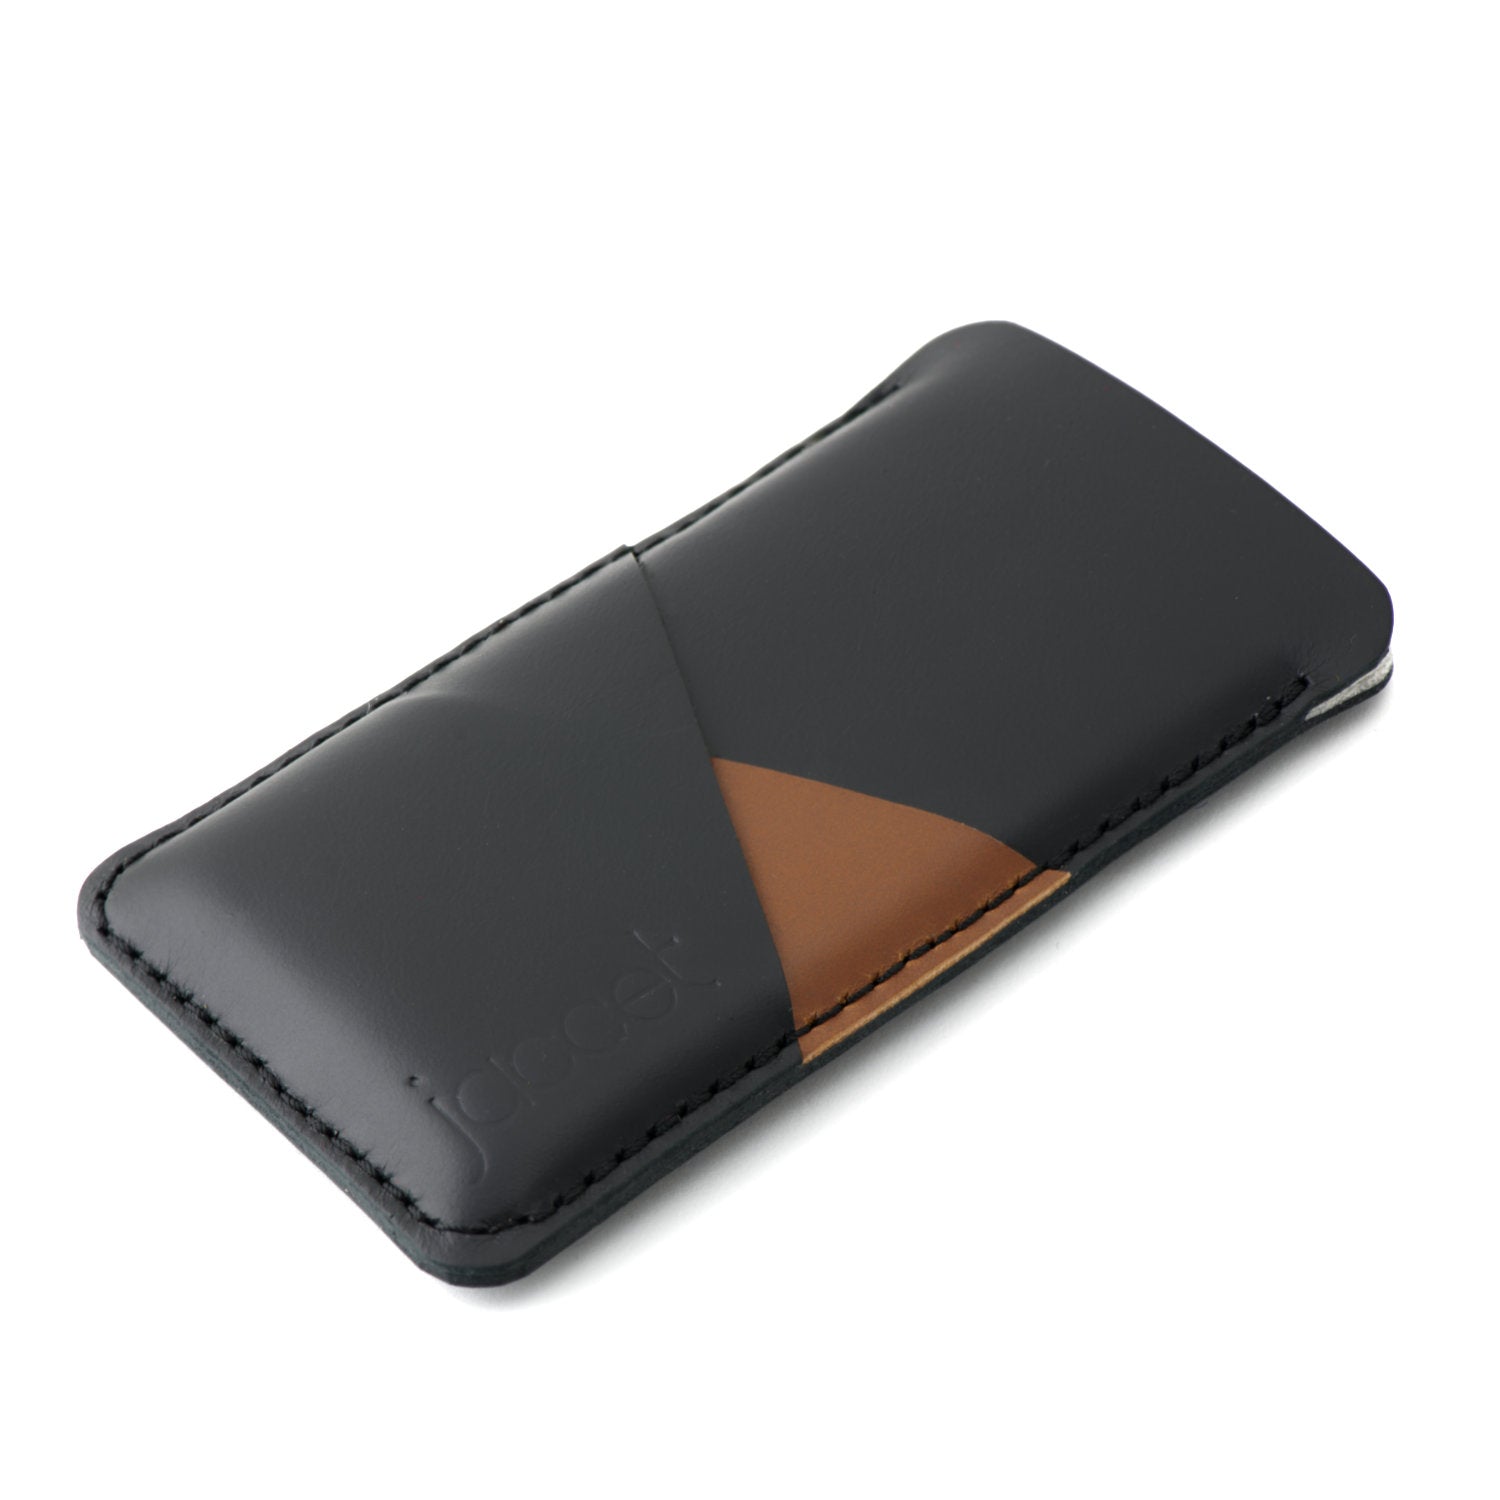 Full-grain leather iPhone sleeve - Black leather with two pockets voor cards